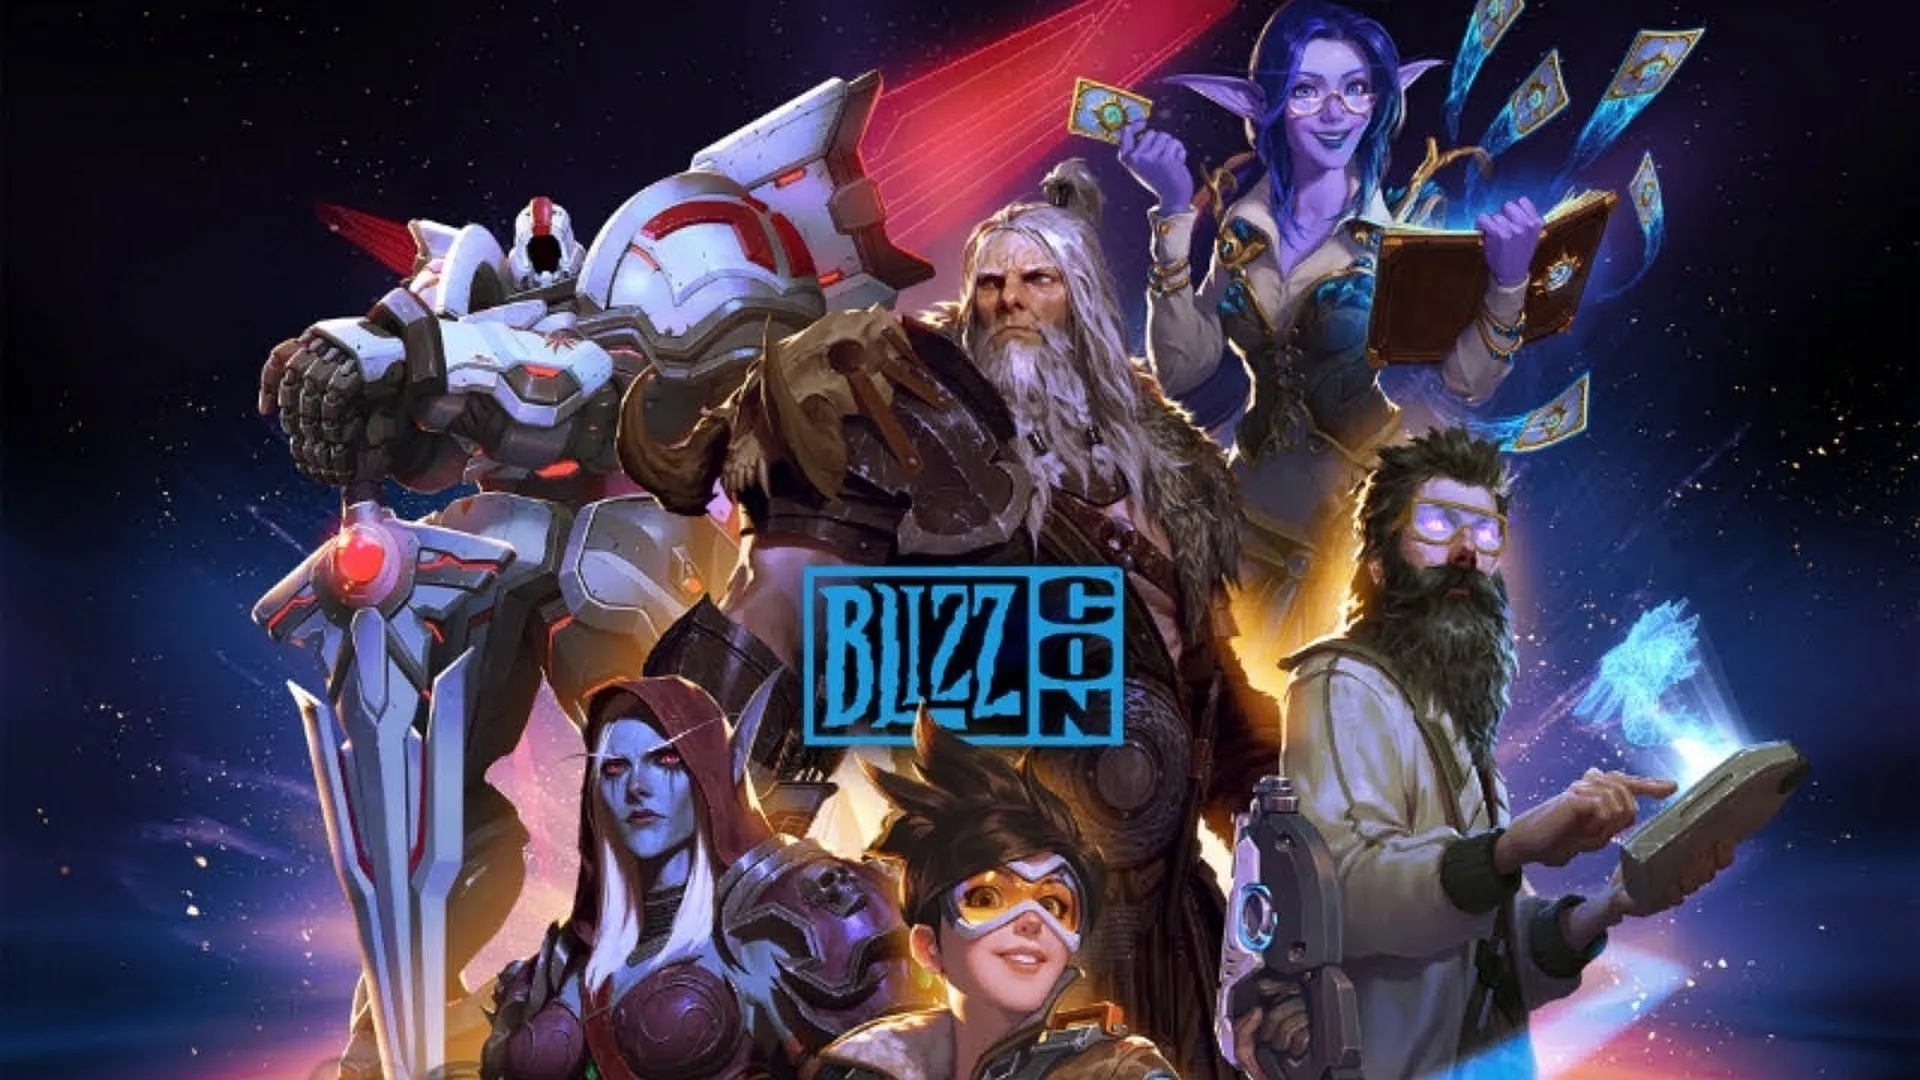 BlizzCon 2020 cancelled, will be replaced with an online event in 2021